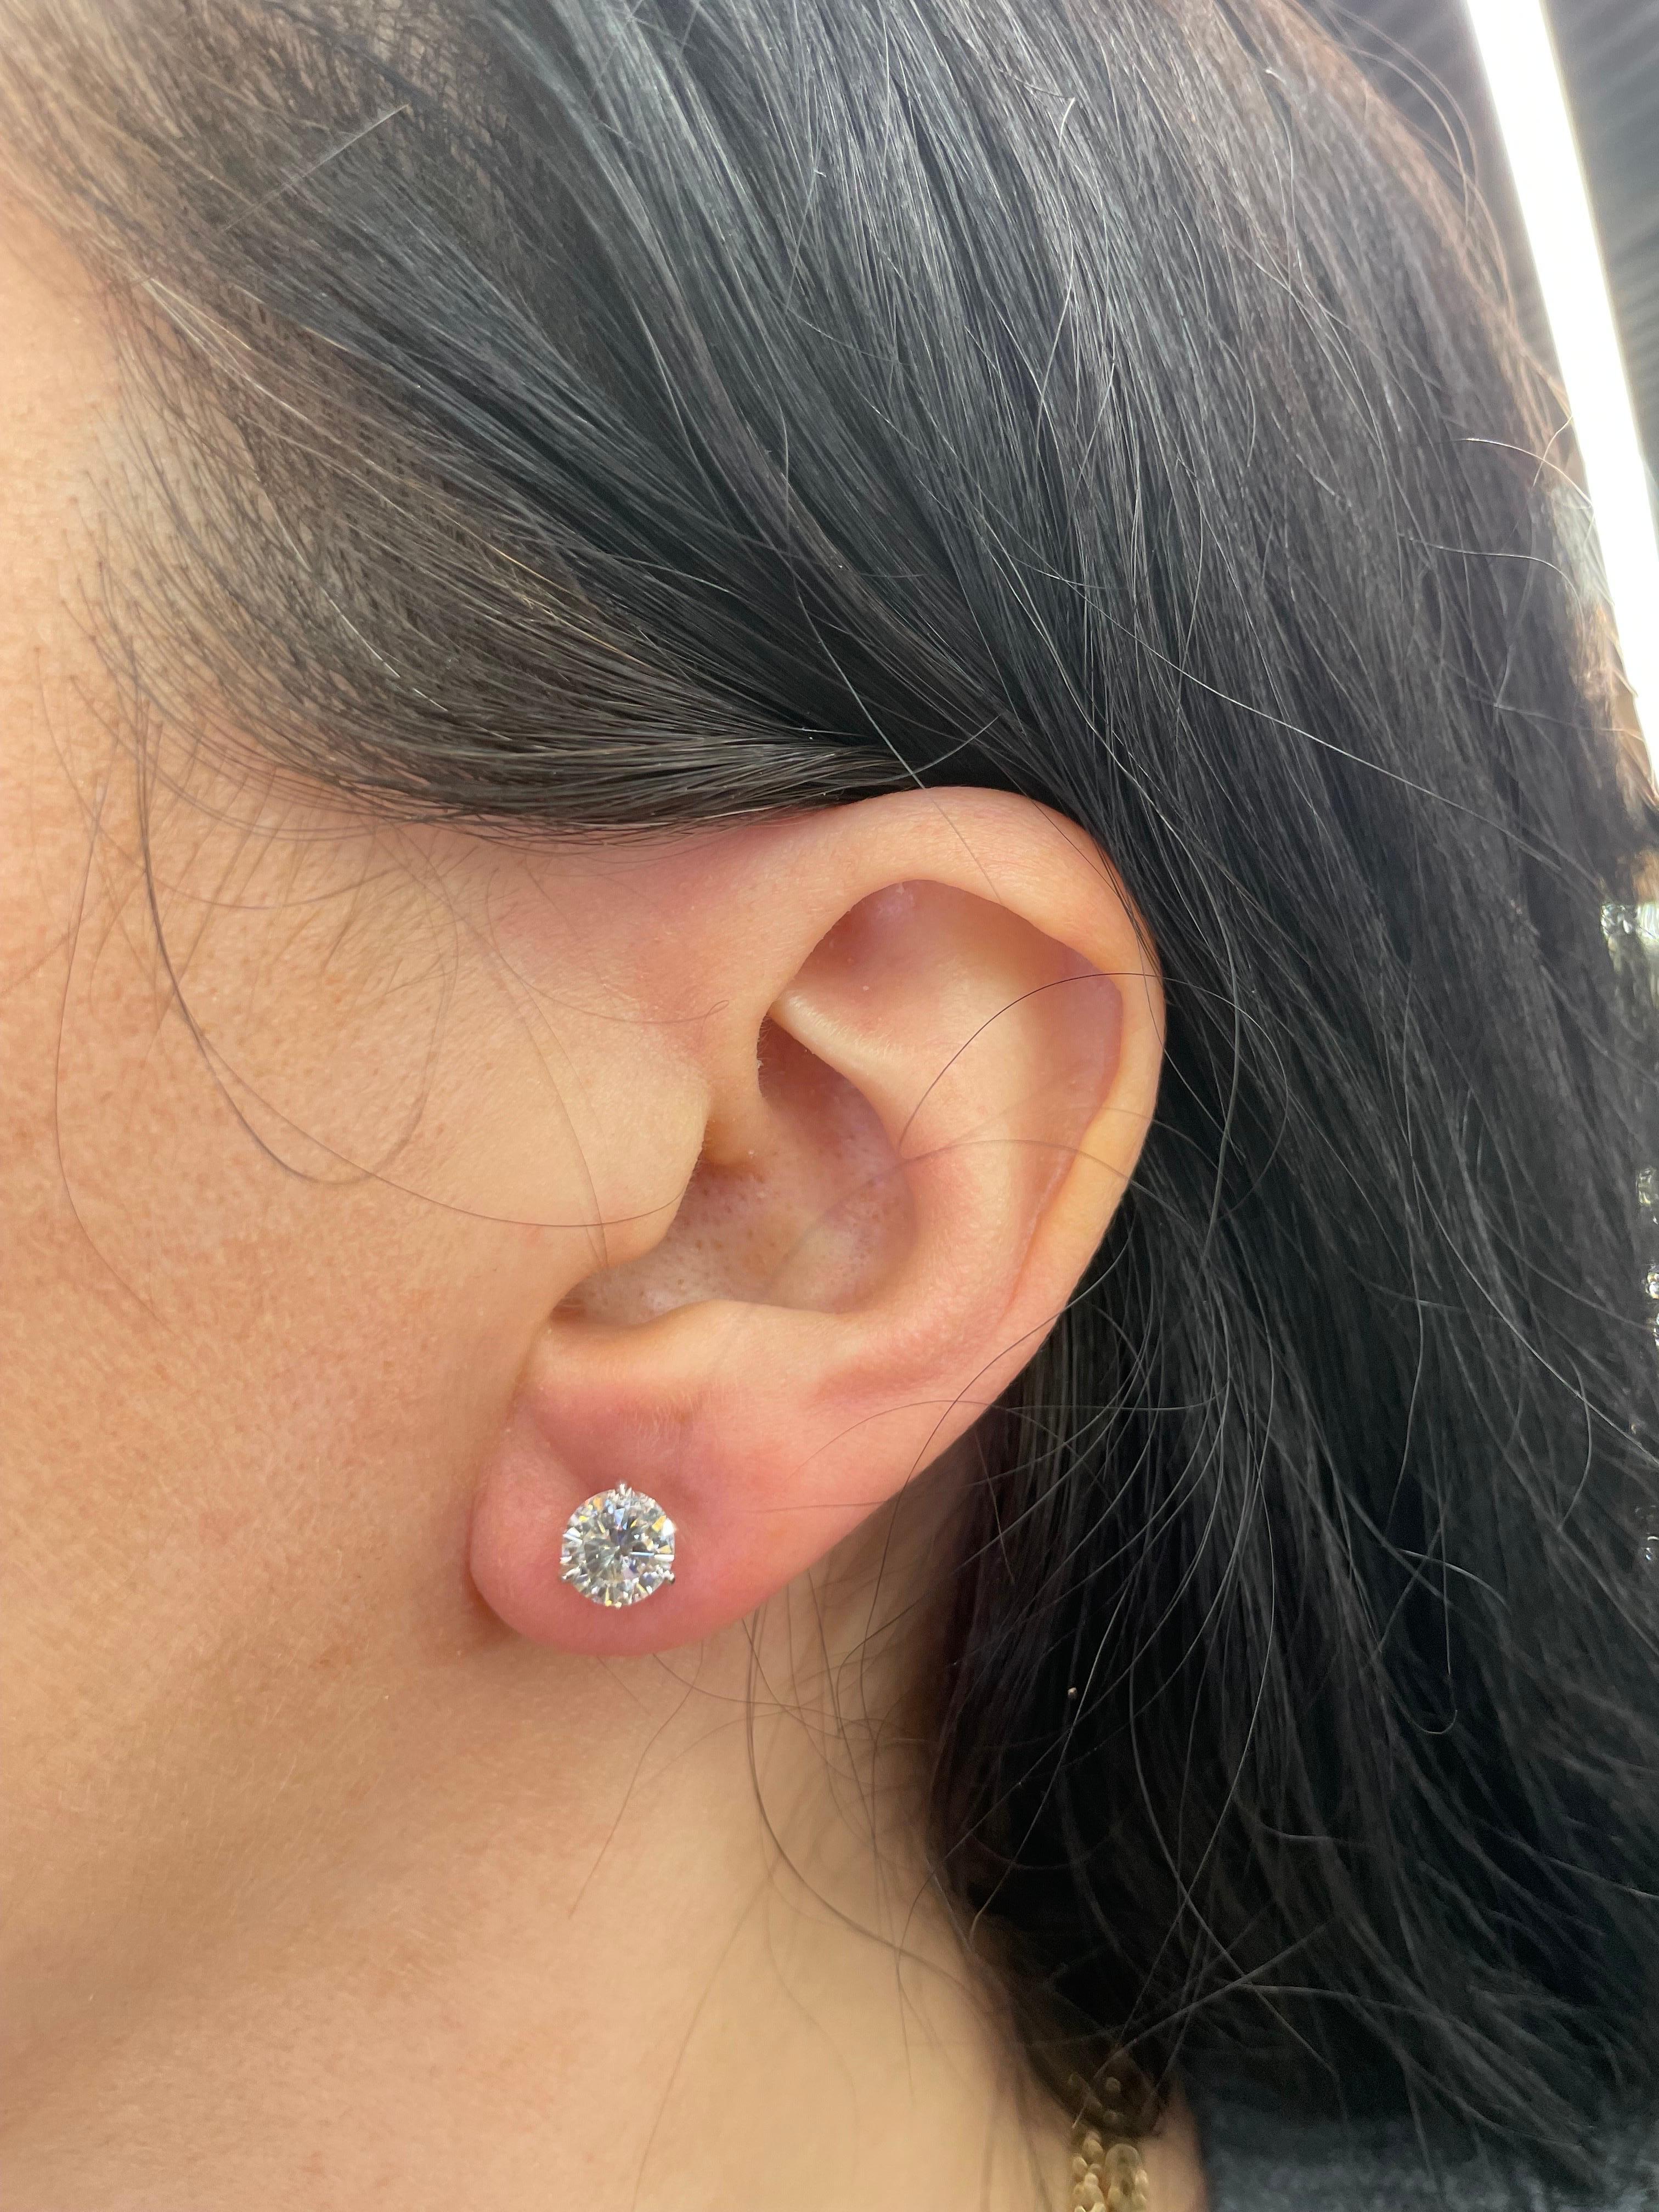 GIA Certified Diamond stud earrings weighing 2.10 Carats, Color G-H, Clarity SI1-SI2, in 18 Karat White Gold 4 prong Champagne setting. 
Setting can be changed to a Basket, Martini or Champagne/ 3 or 4 Prong/ 14 or 18 Karat.

DM for more Info &